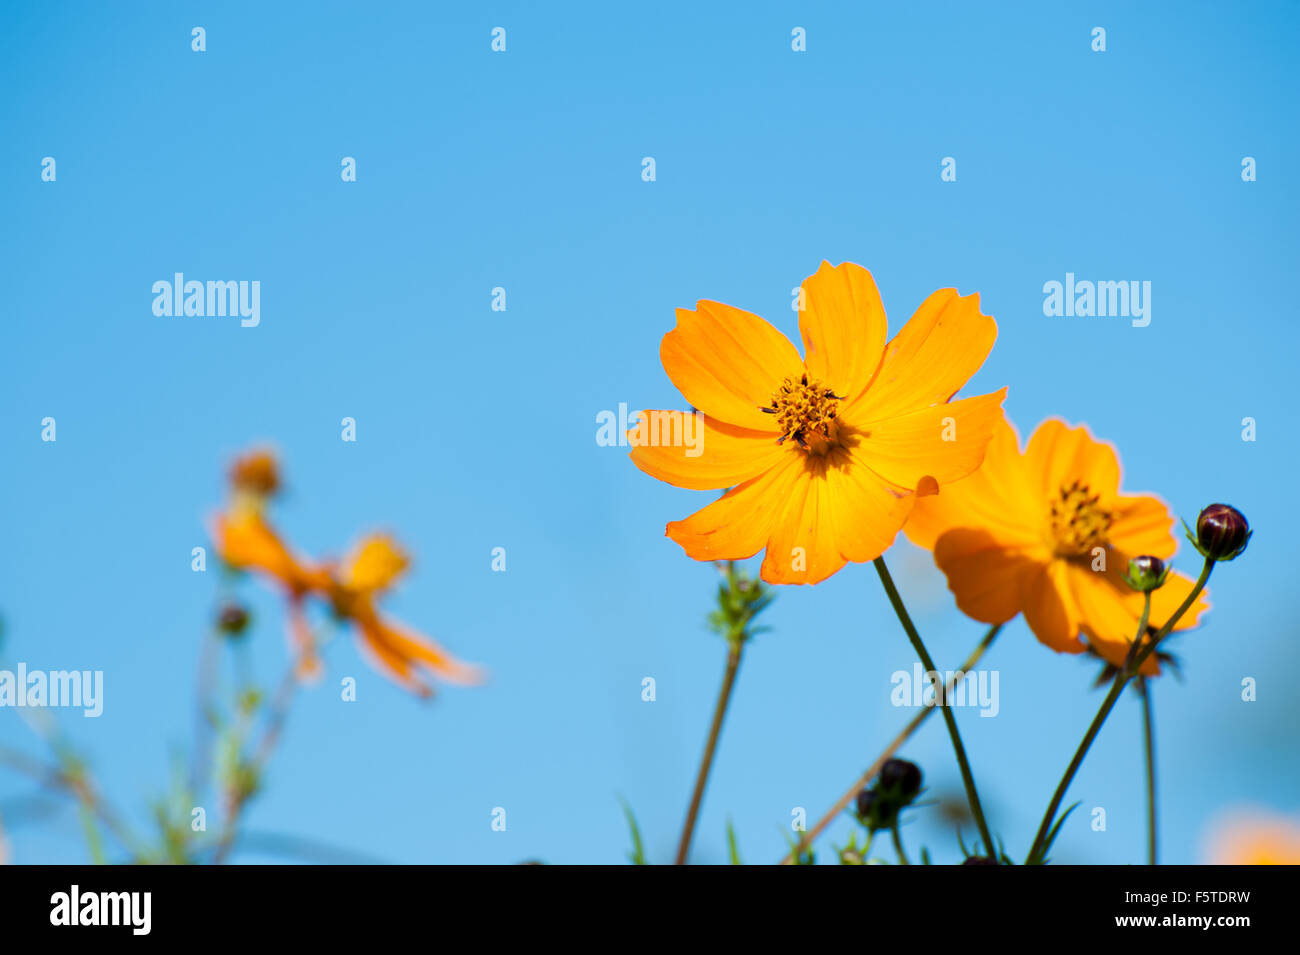 Beautiful yellow flowers in the garden Cosmos bipinnatus or Mexican aster Stock Photo